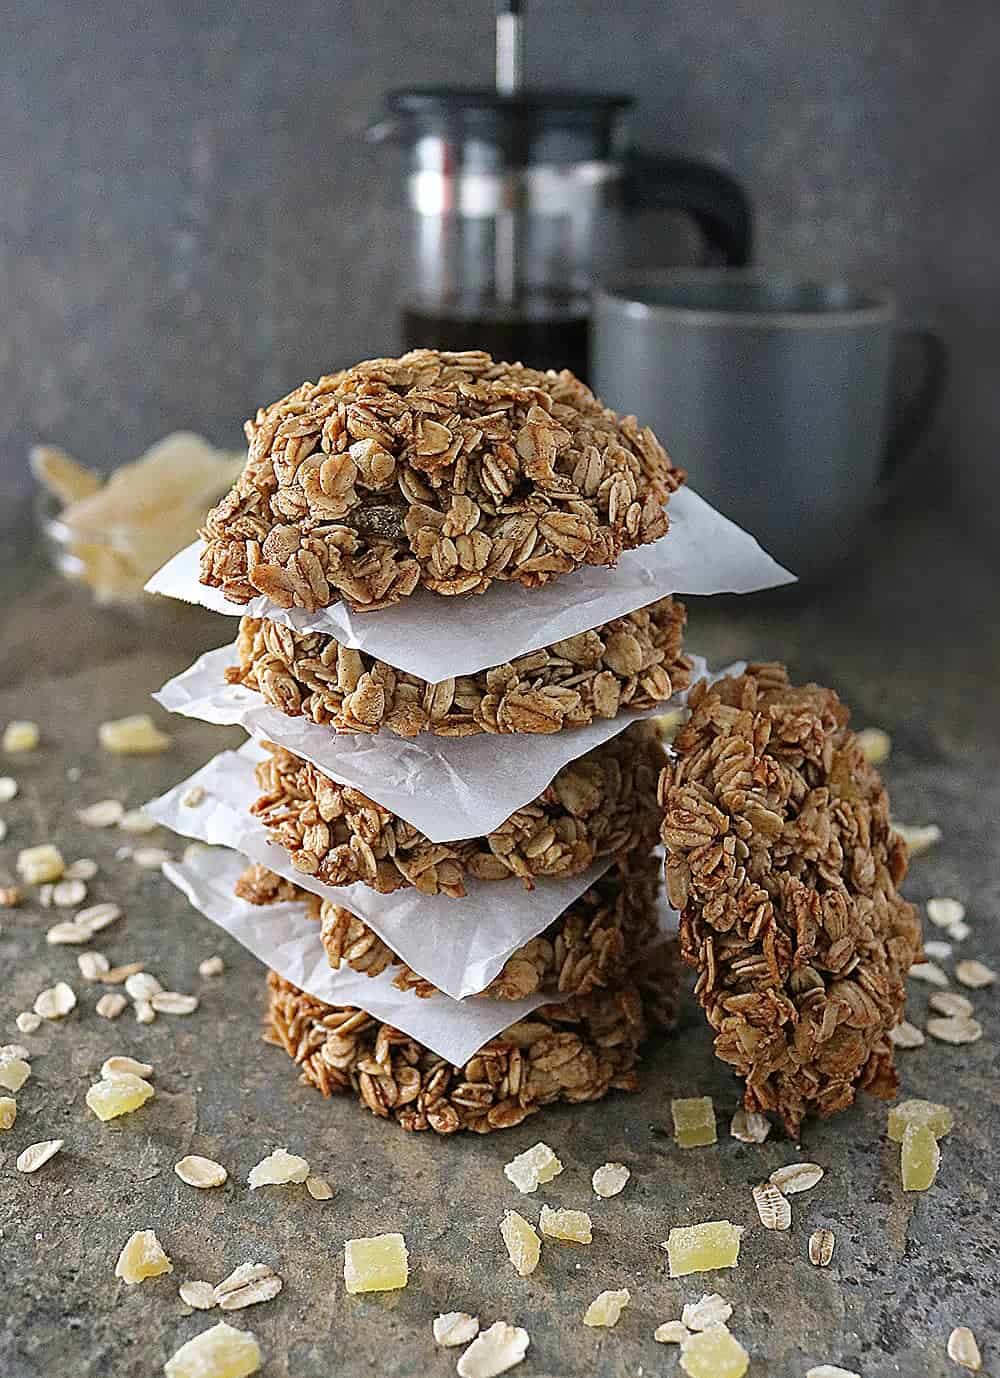 Ginger Granola Breakfast Cookies full of ginger and warm spices. Breakfast on the go never looked so good.